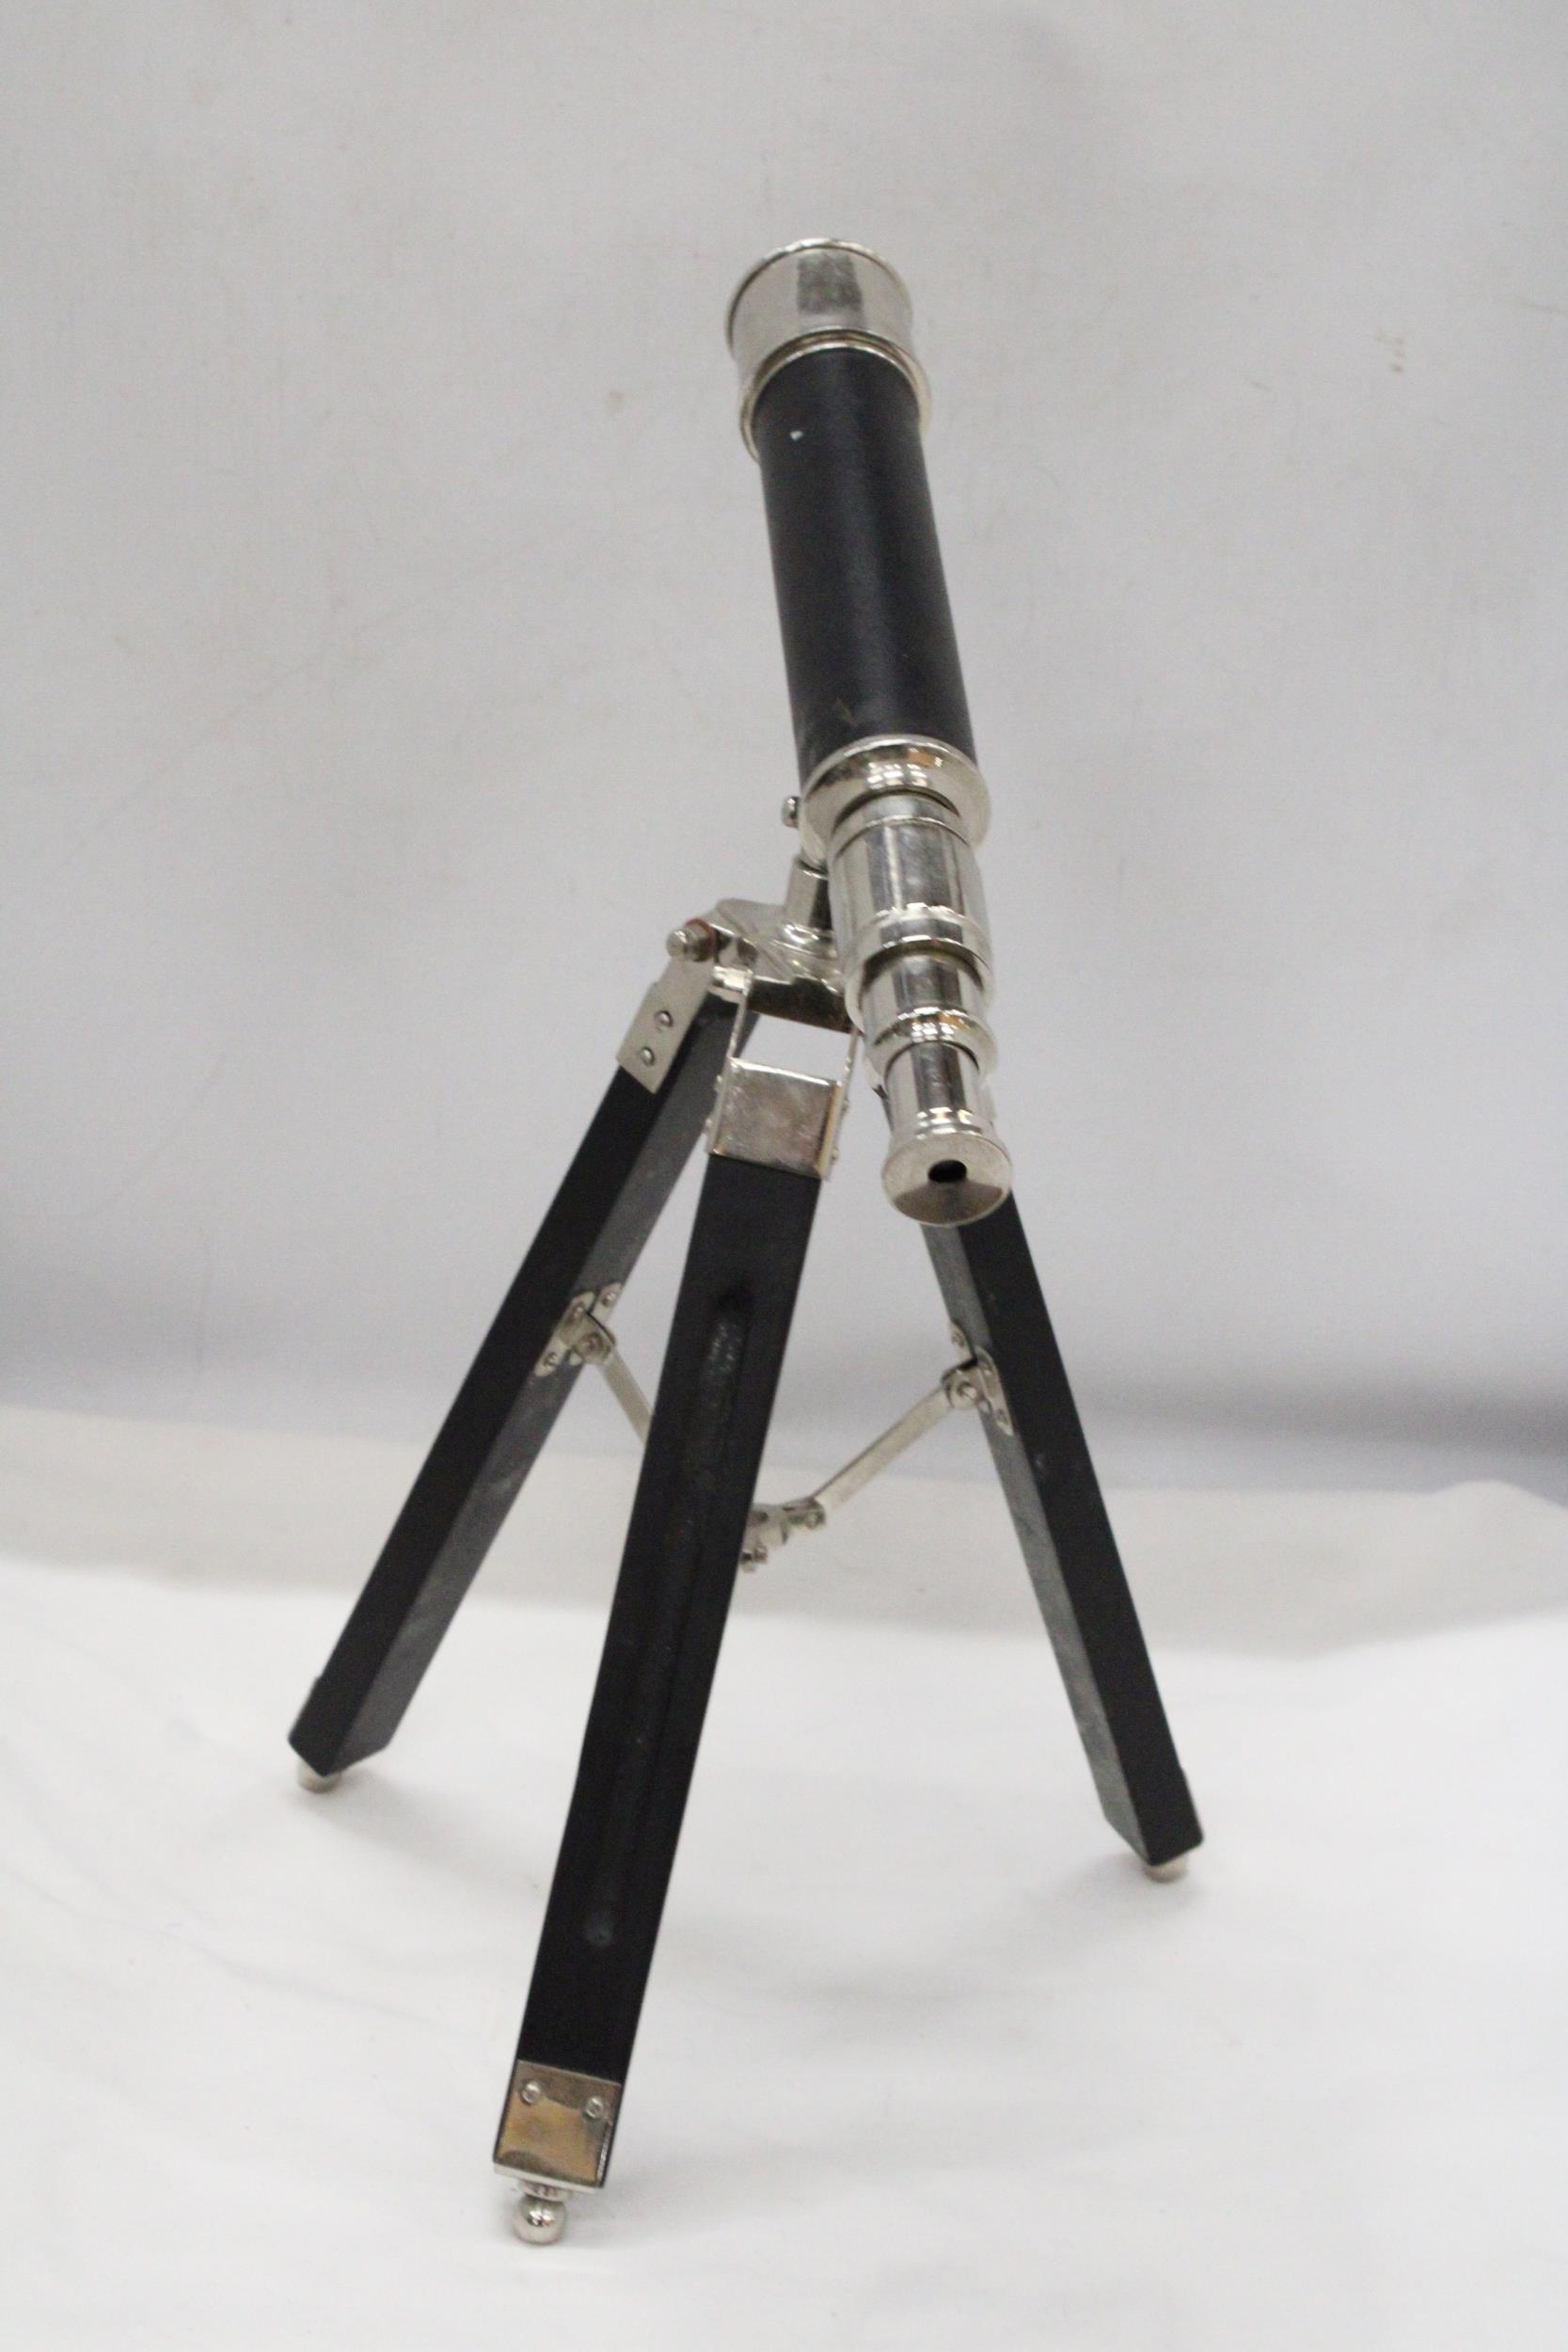 A CHROME TELESCOPE WITH TRIPOD STAND - Image 4 of 4